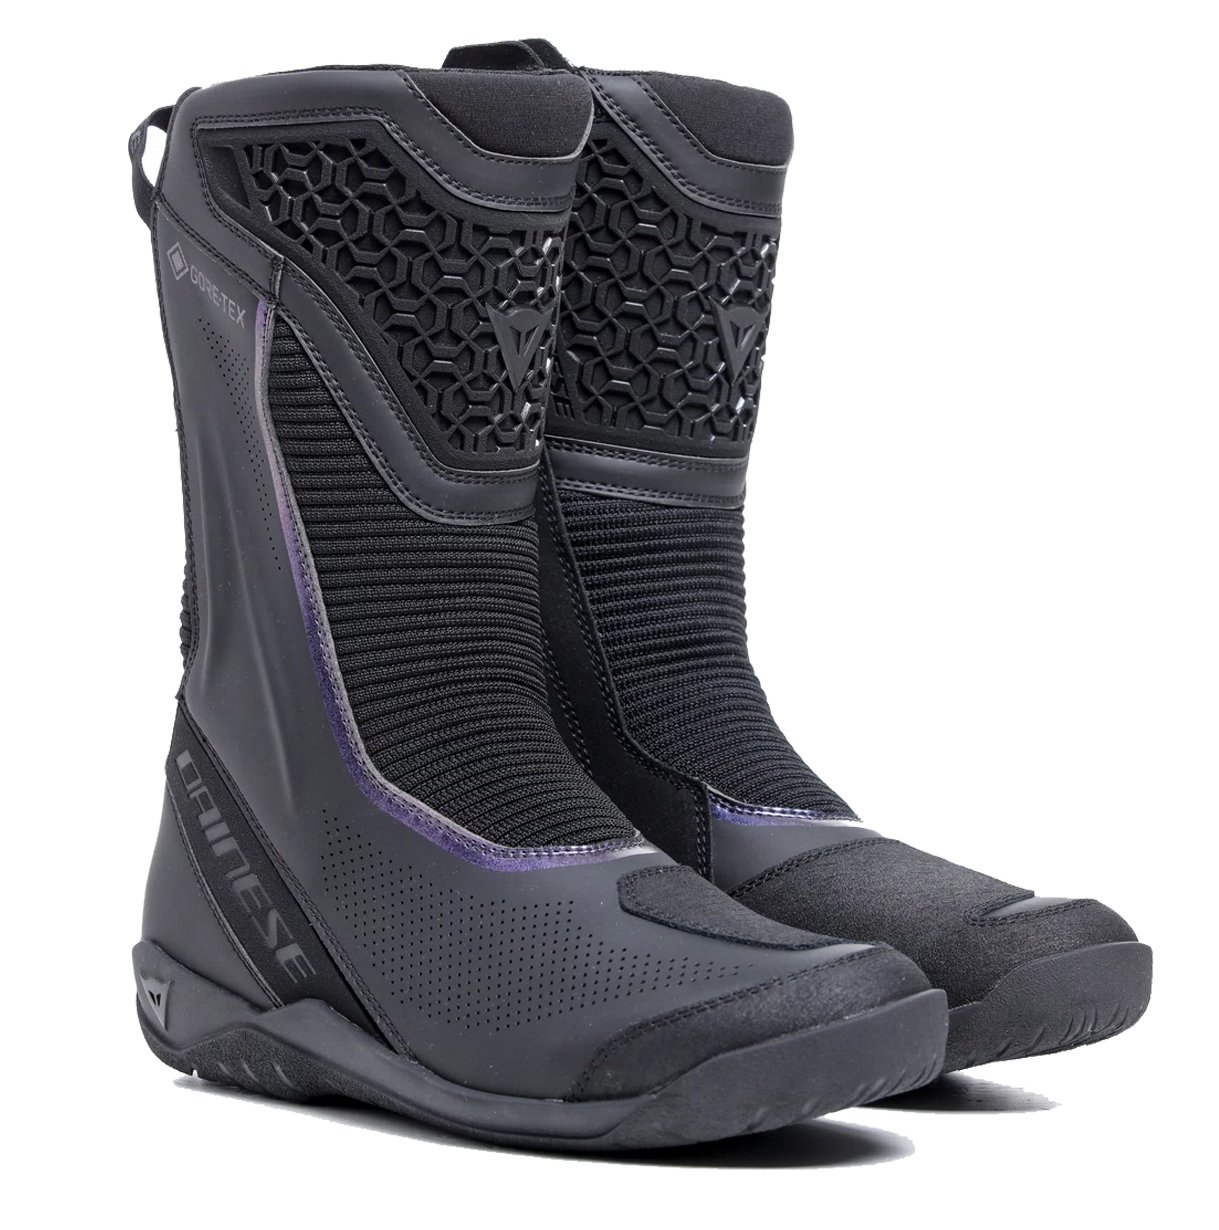 Image of Dainese Freeland 2 Gore-Tex Boots Wmn Black Size 36 ID 8051019693099